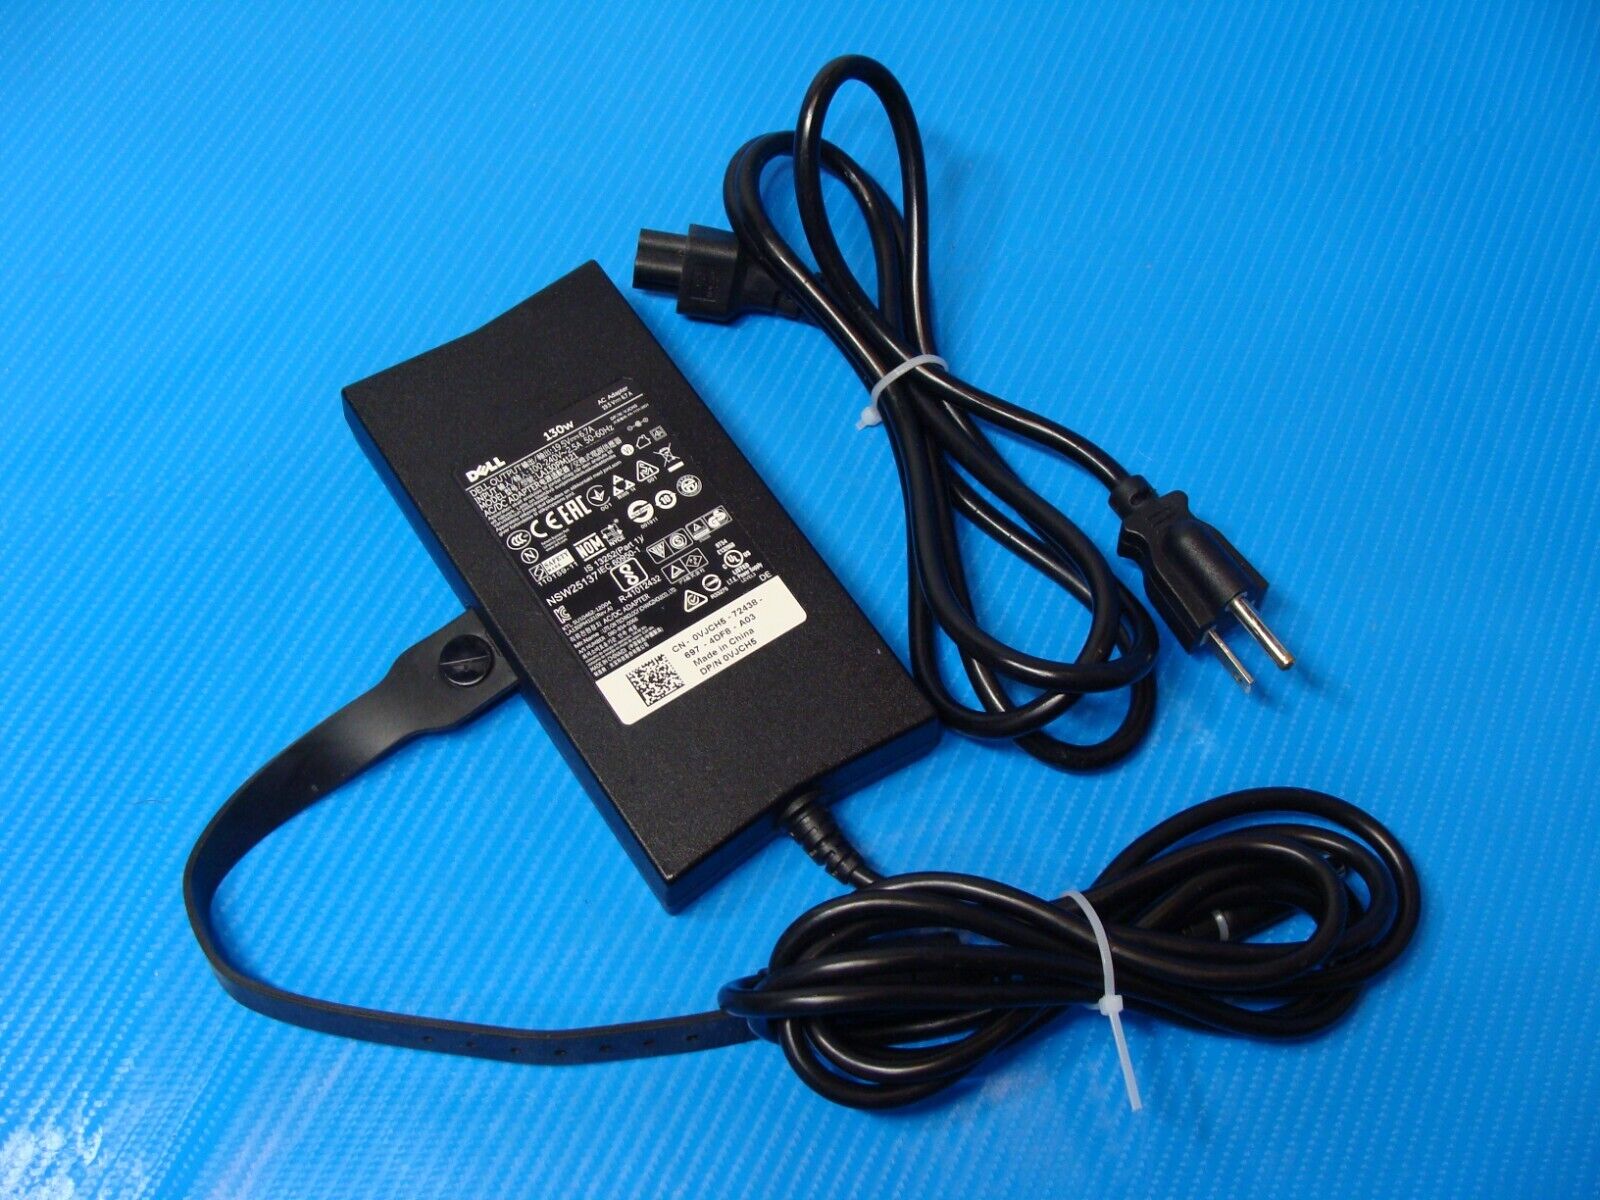 Genuine Dell AC Power Adapter Charger 19.5V 6.7A 130W  LA130PM121 VJCH5